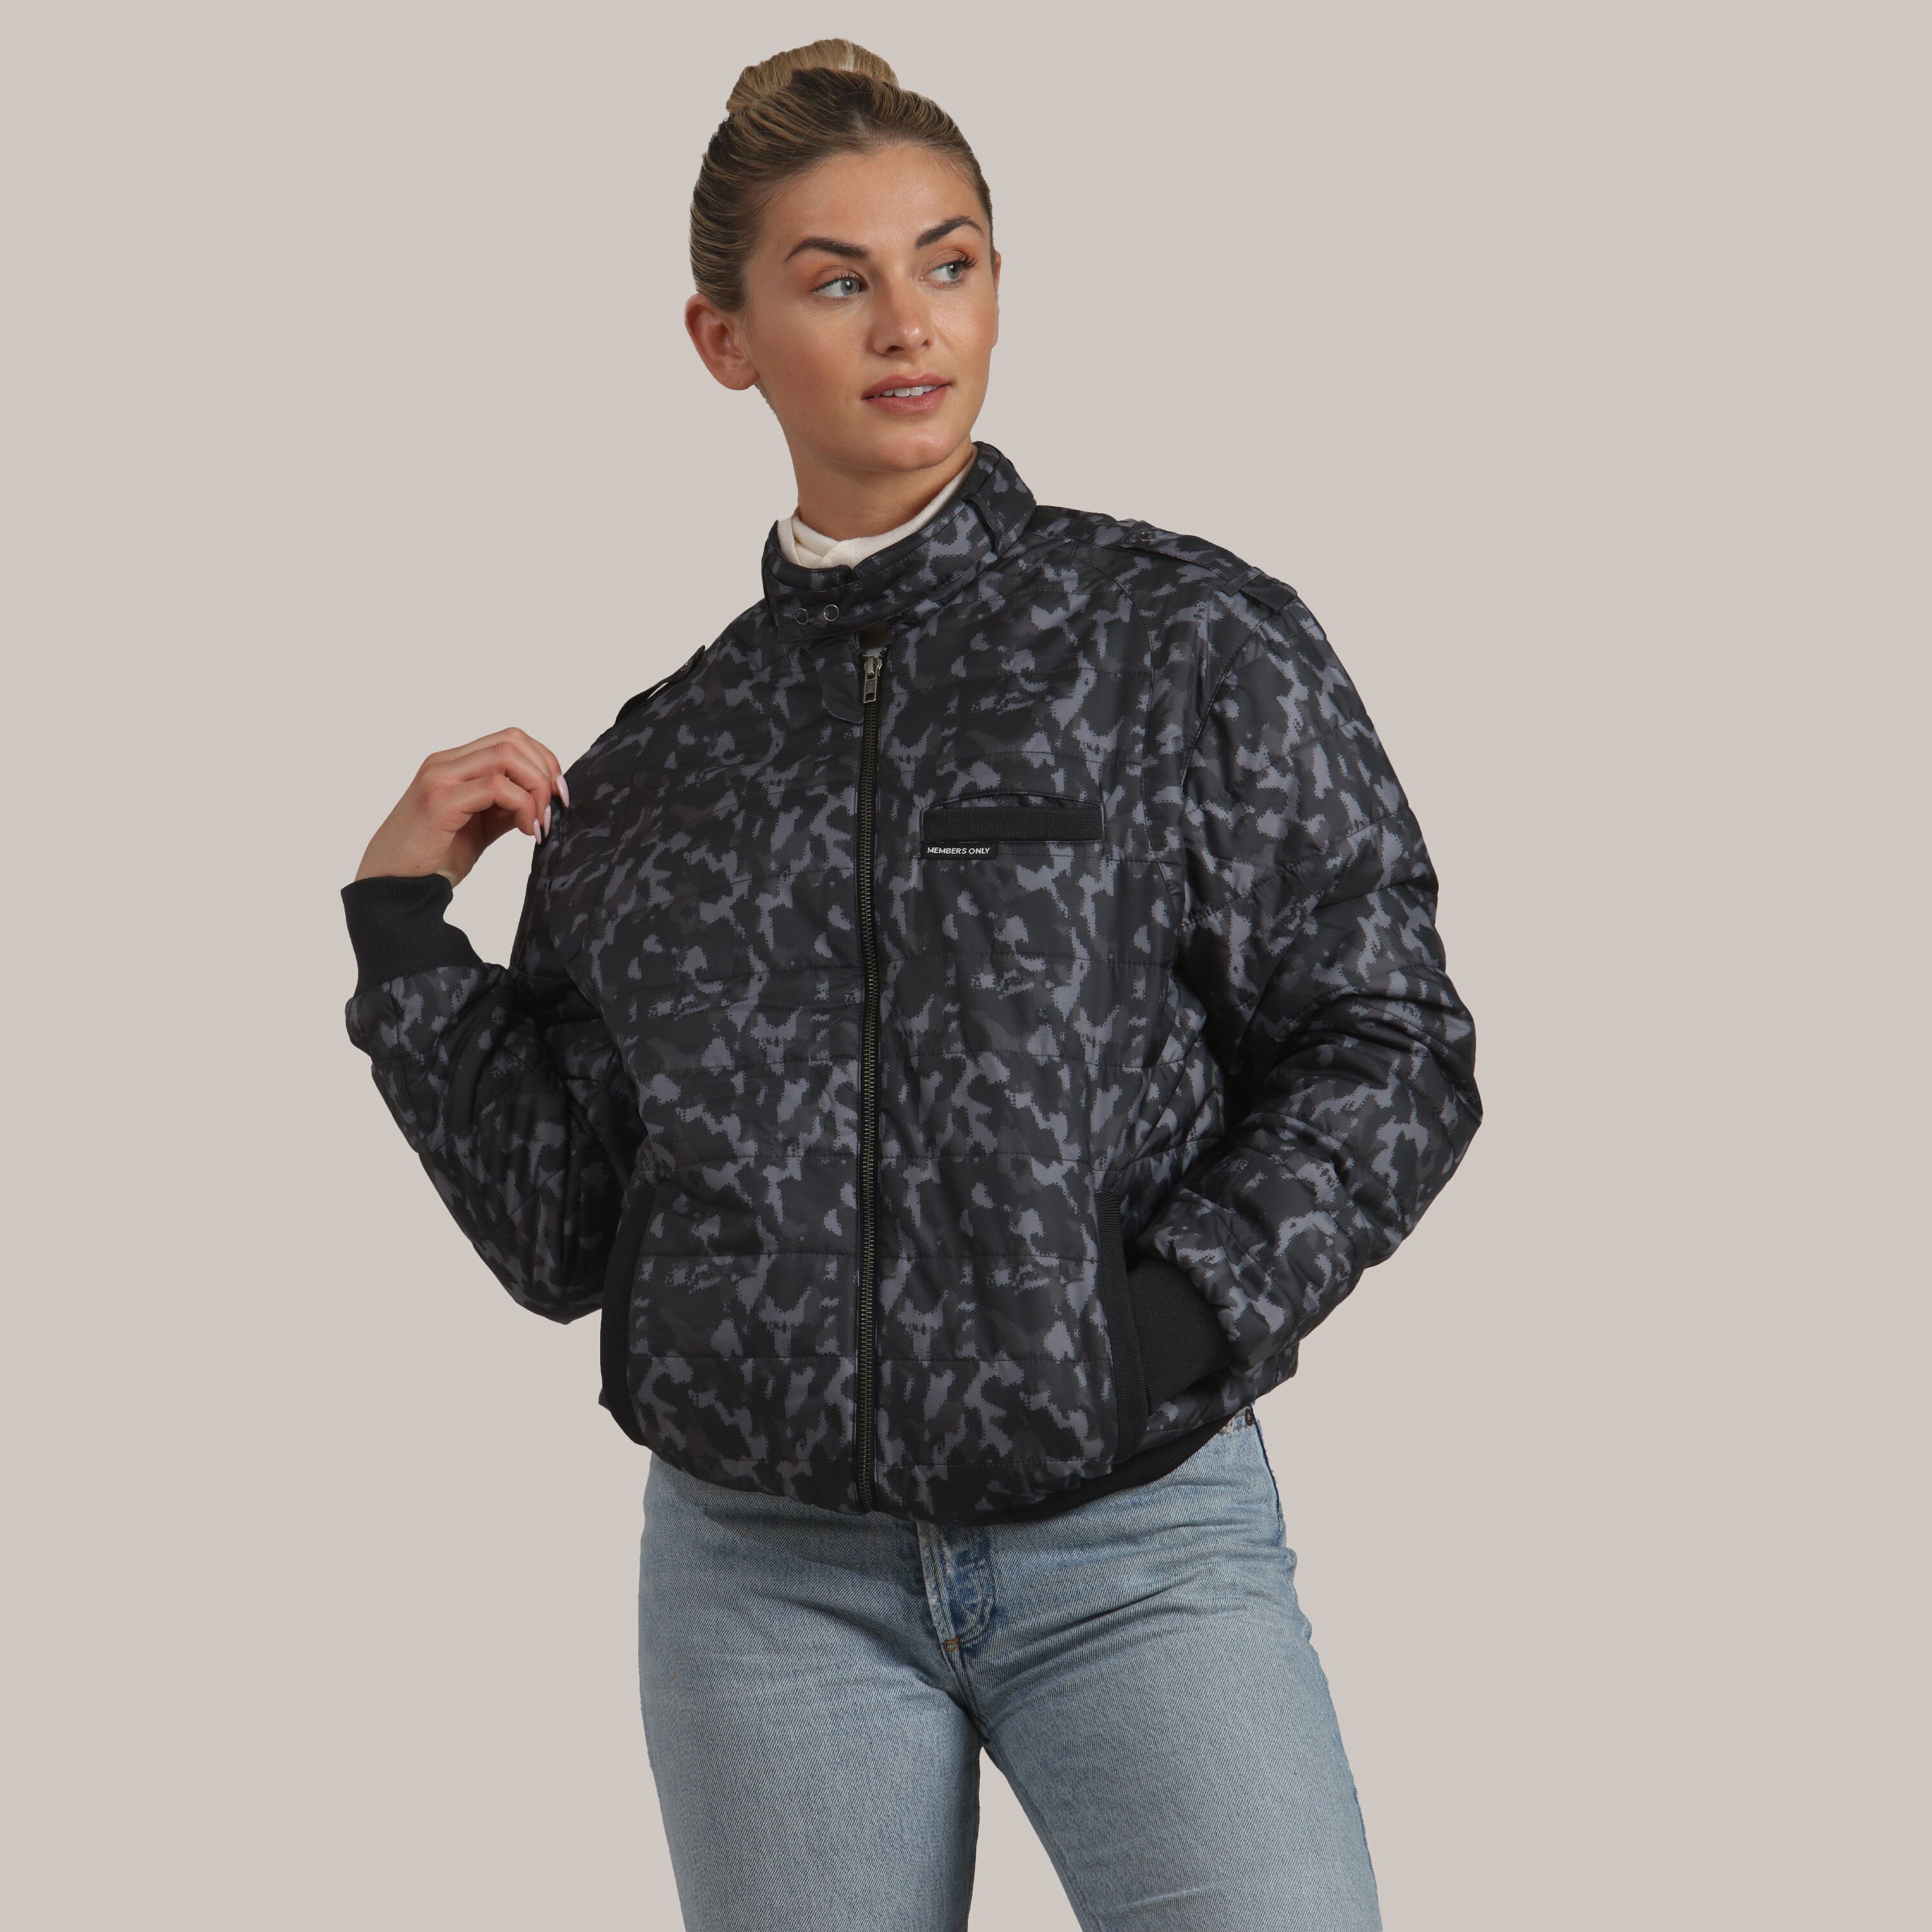 Women's SoHo Oversized Quilted Jacket Women's Iconic Jacket Members Only 